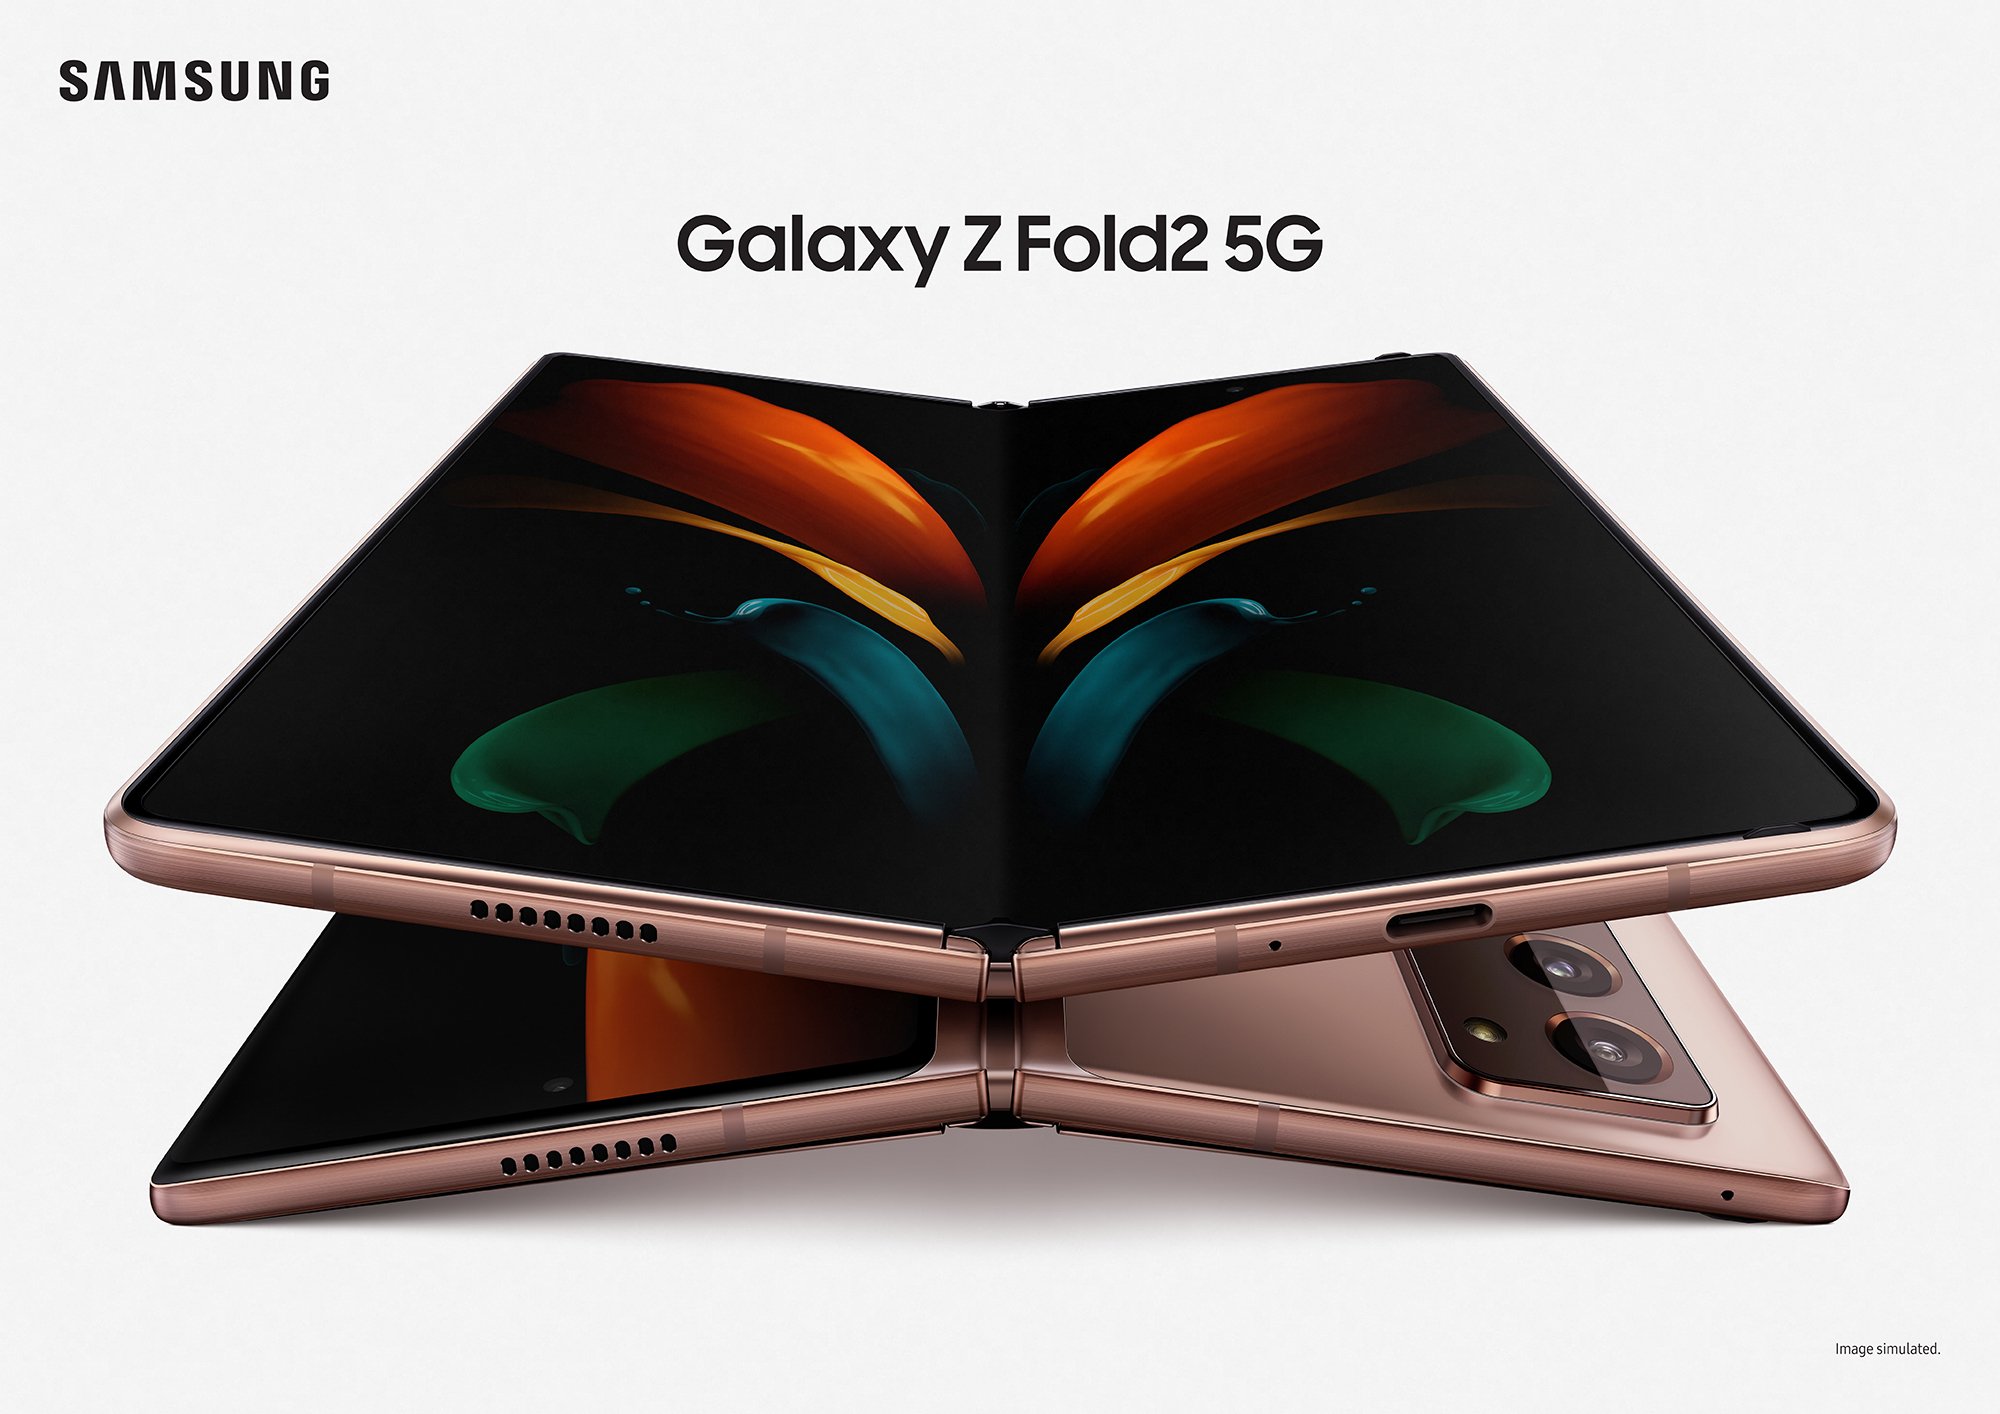 Report: Galaxy W21 will be based on Galaxy Z Fold2 in gold color